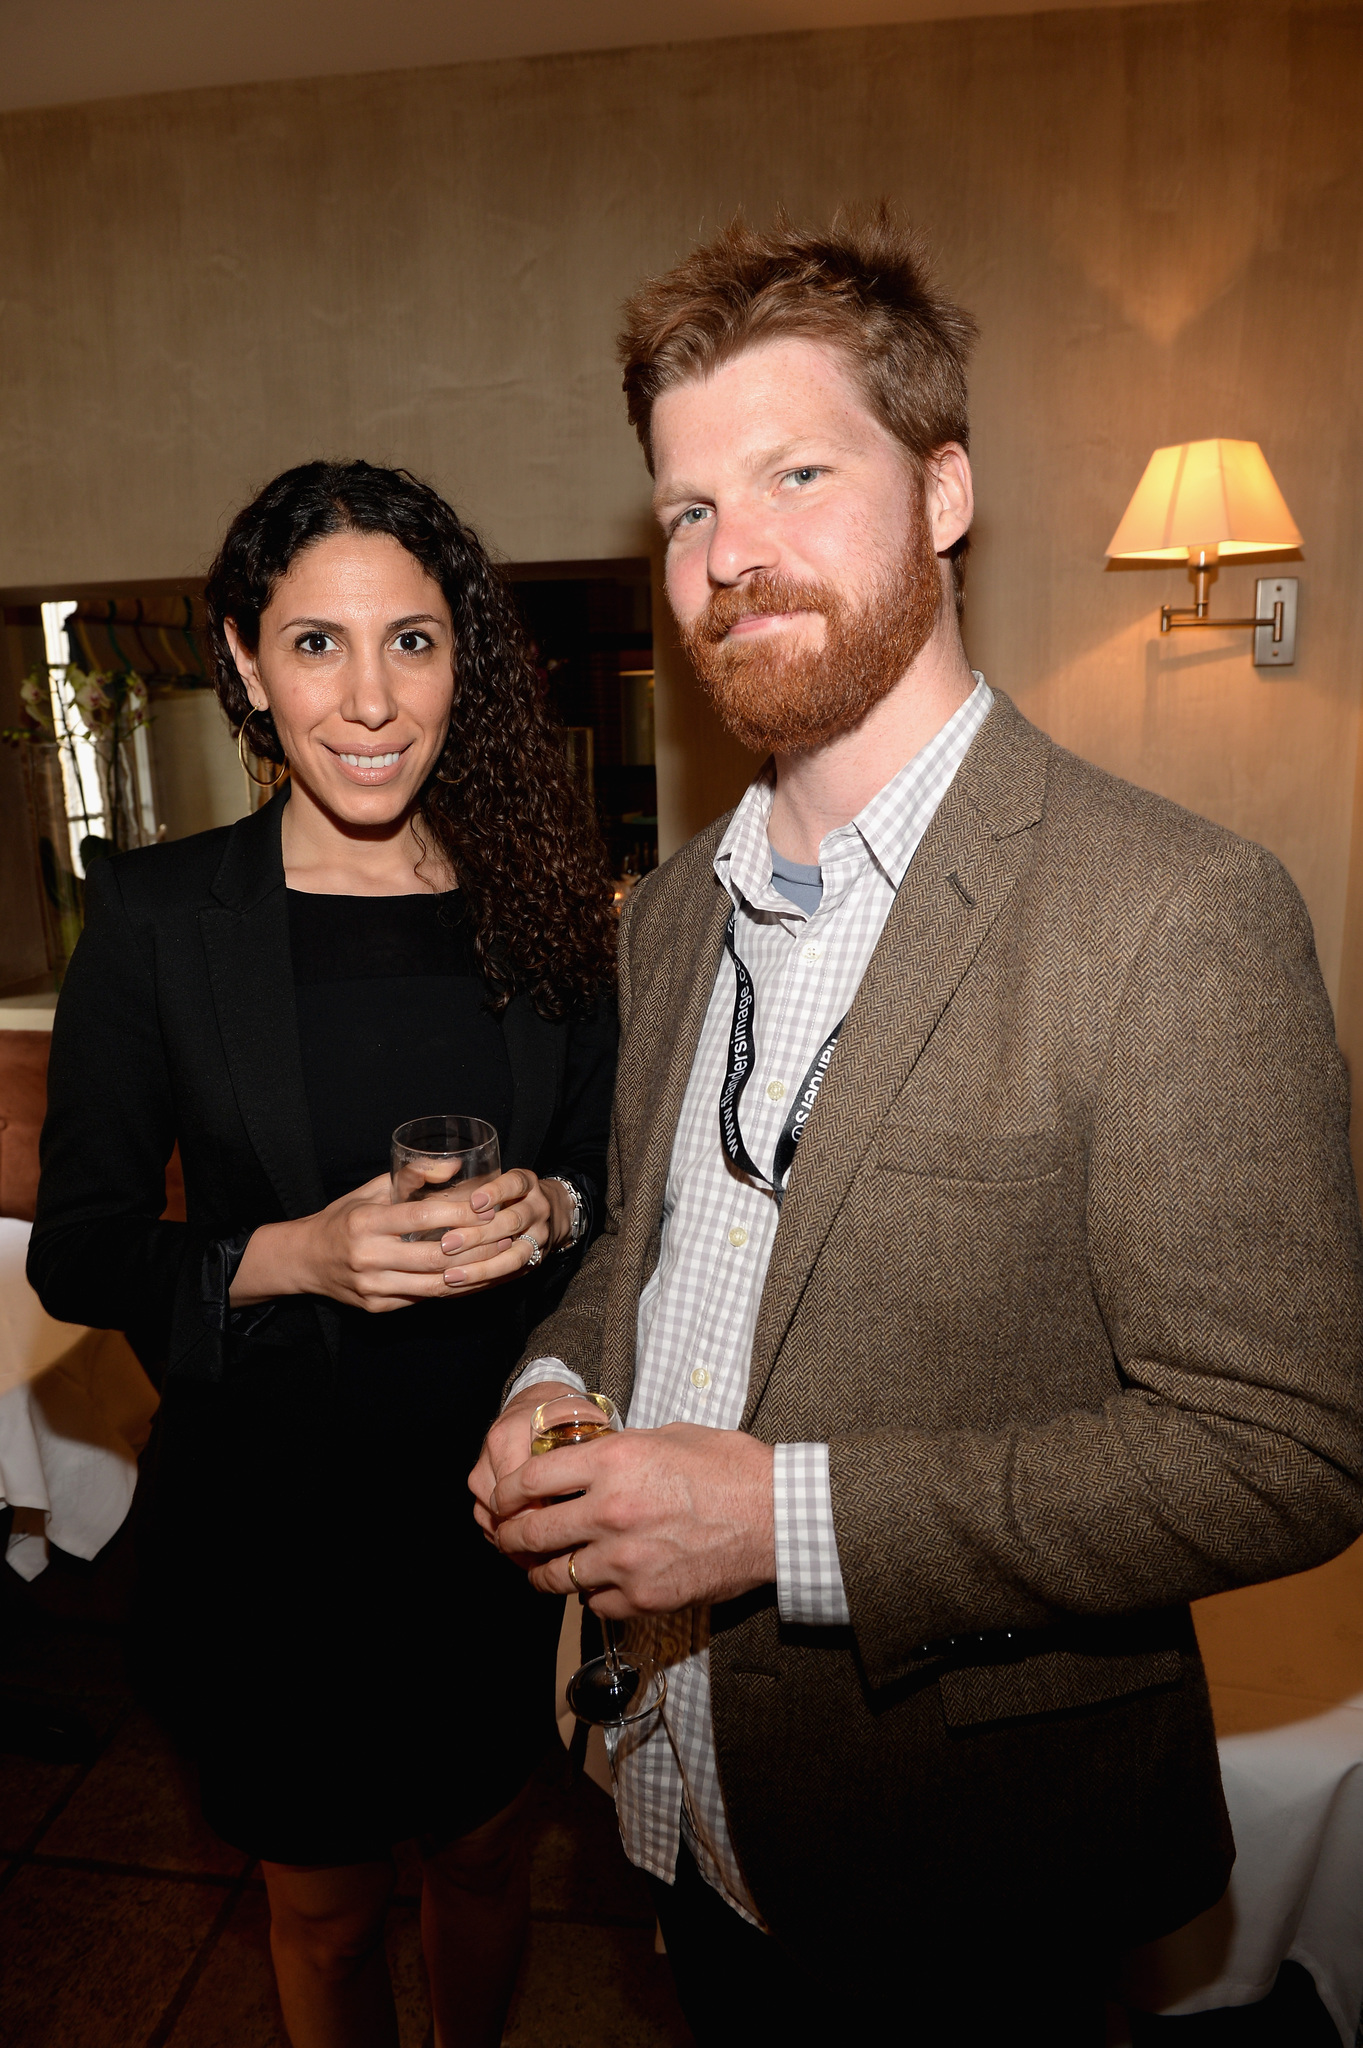 IMDb's Yasmine Hanani and AFI Fest's Lane Kneedler attend the IMDB's 2013 Cannes Film Festival Dinner Party during the 66th Annual Cannes Film Festival at Restaurant Mantel on May 20, 2013 in Cannes, France.